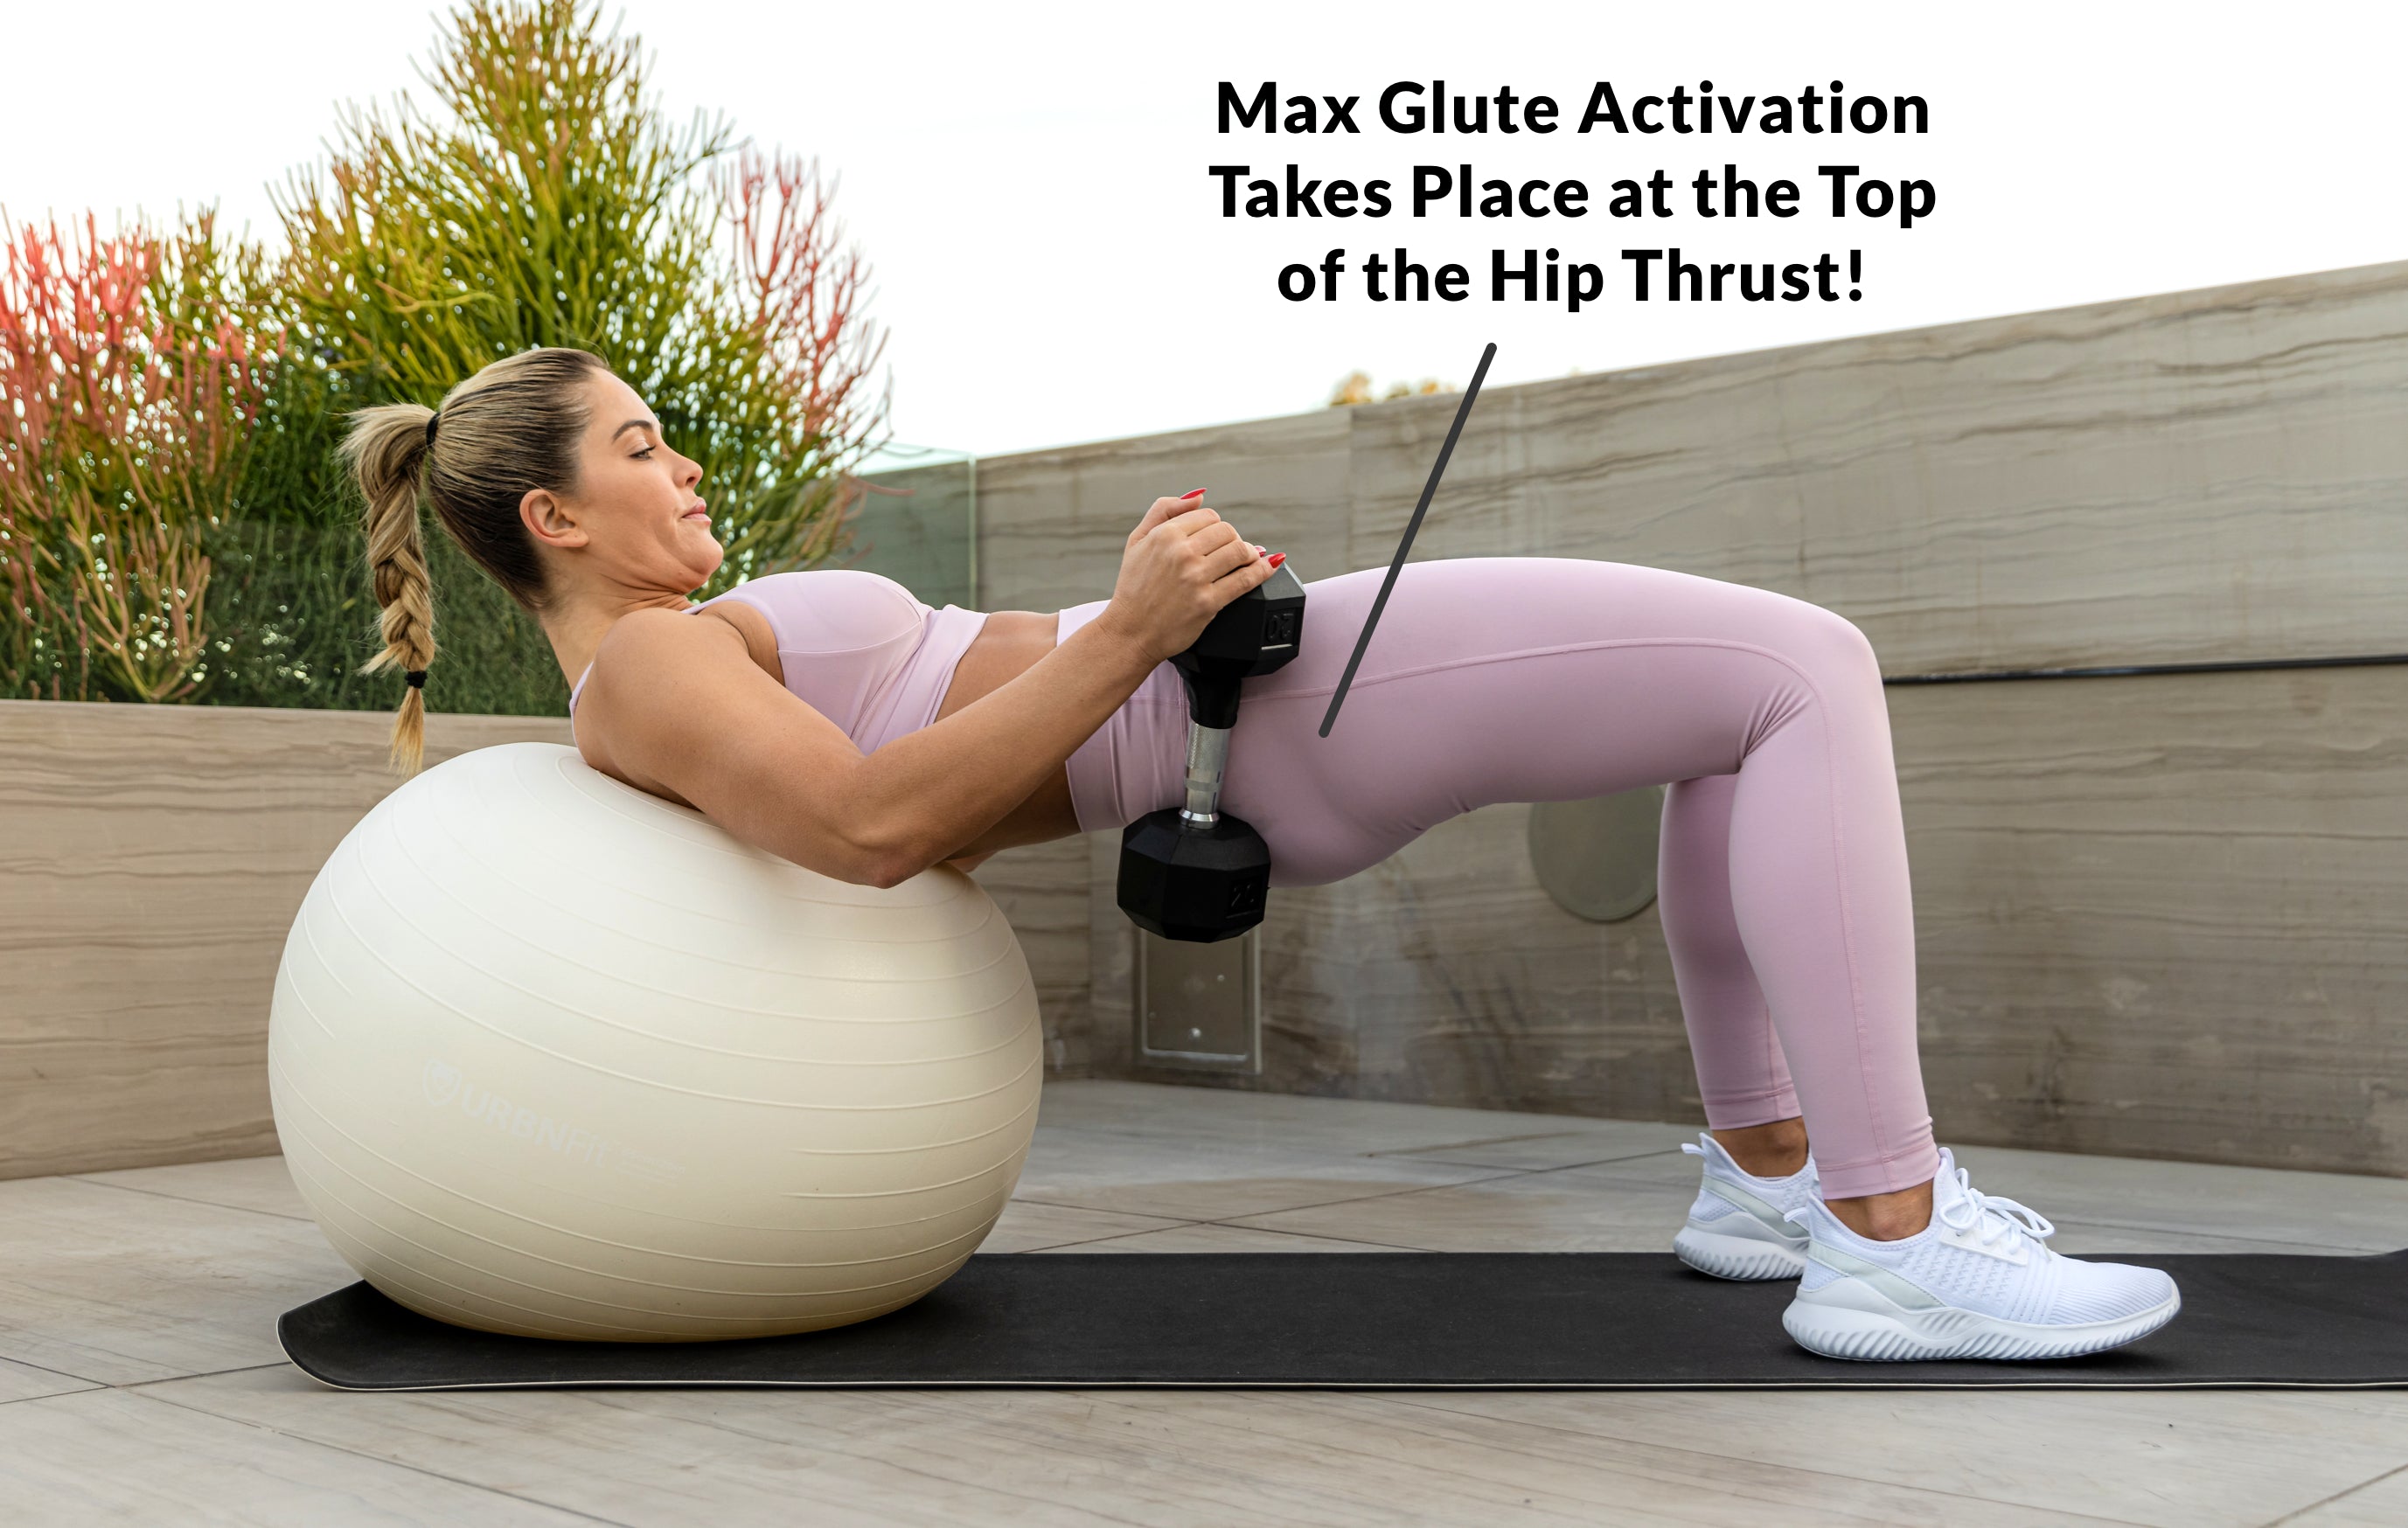 Hip Thrust Range of Motion - How Low Can You Go?